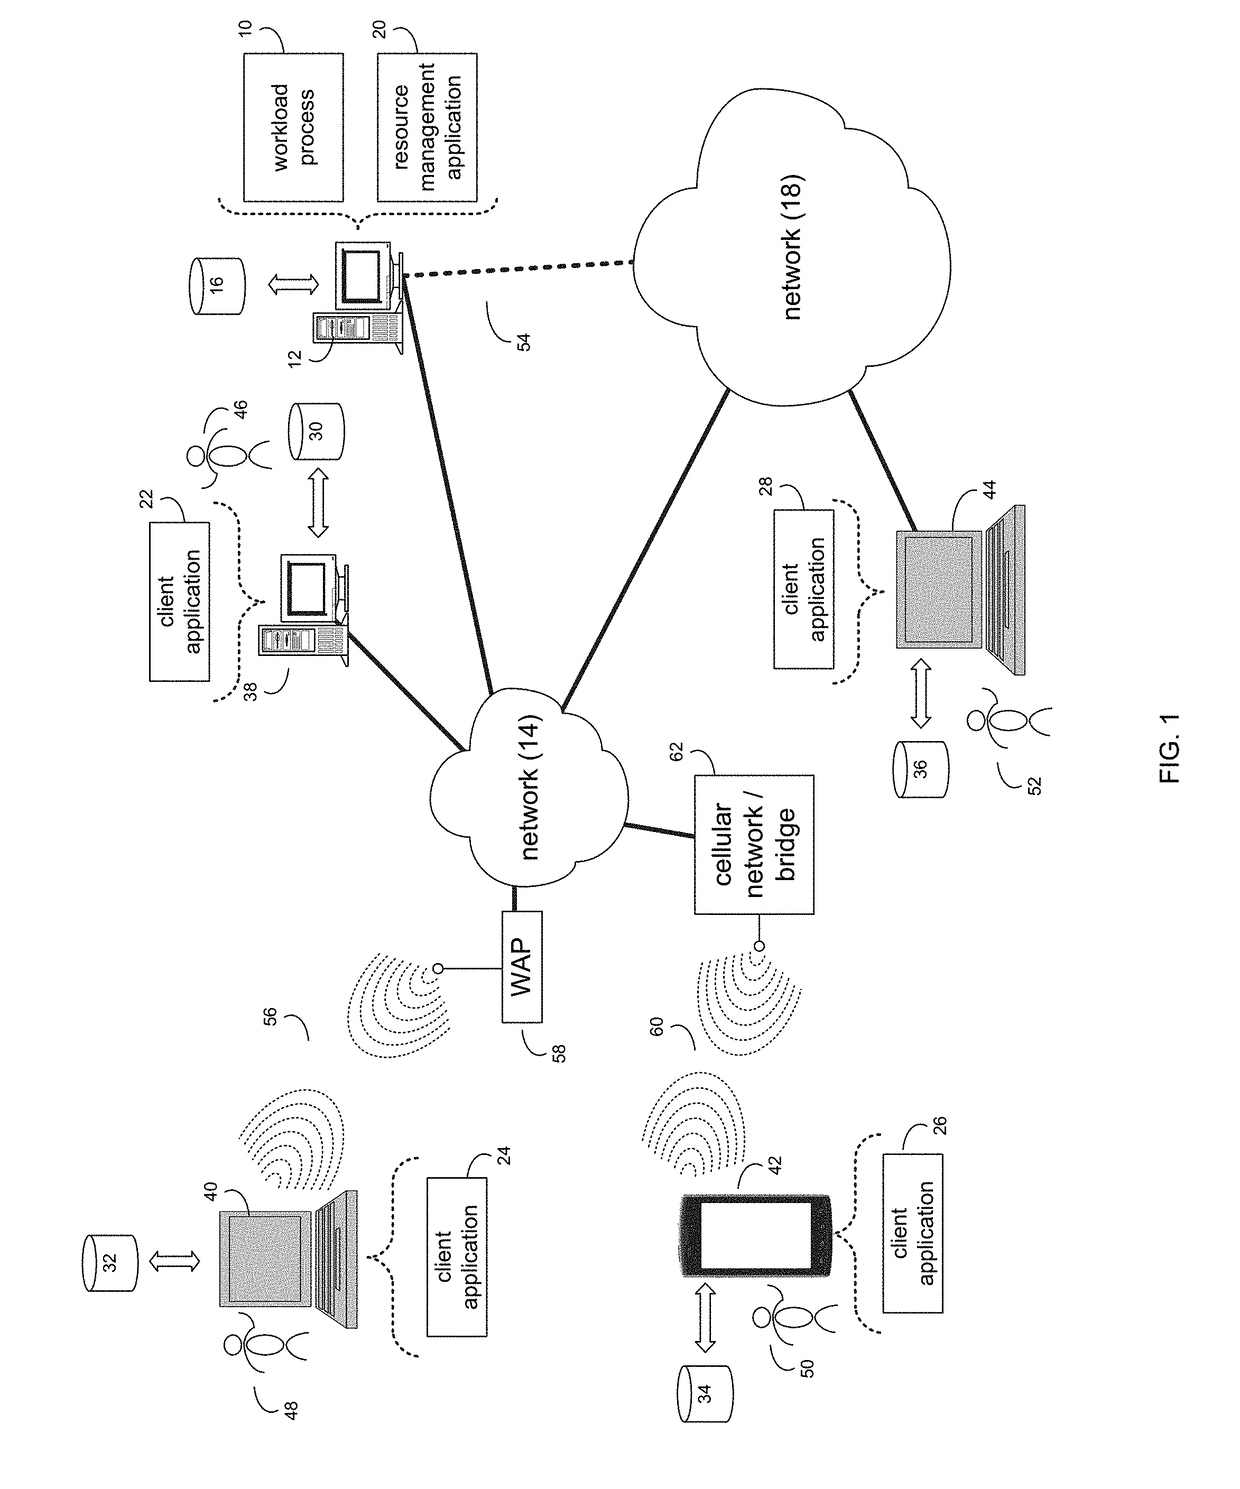 System and method for dynamic runtime merging of real time streaming operator environments